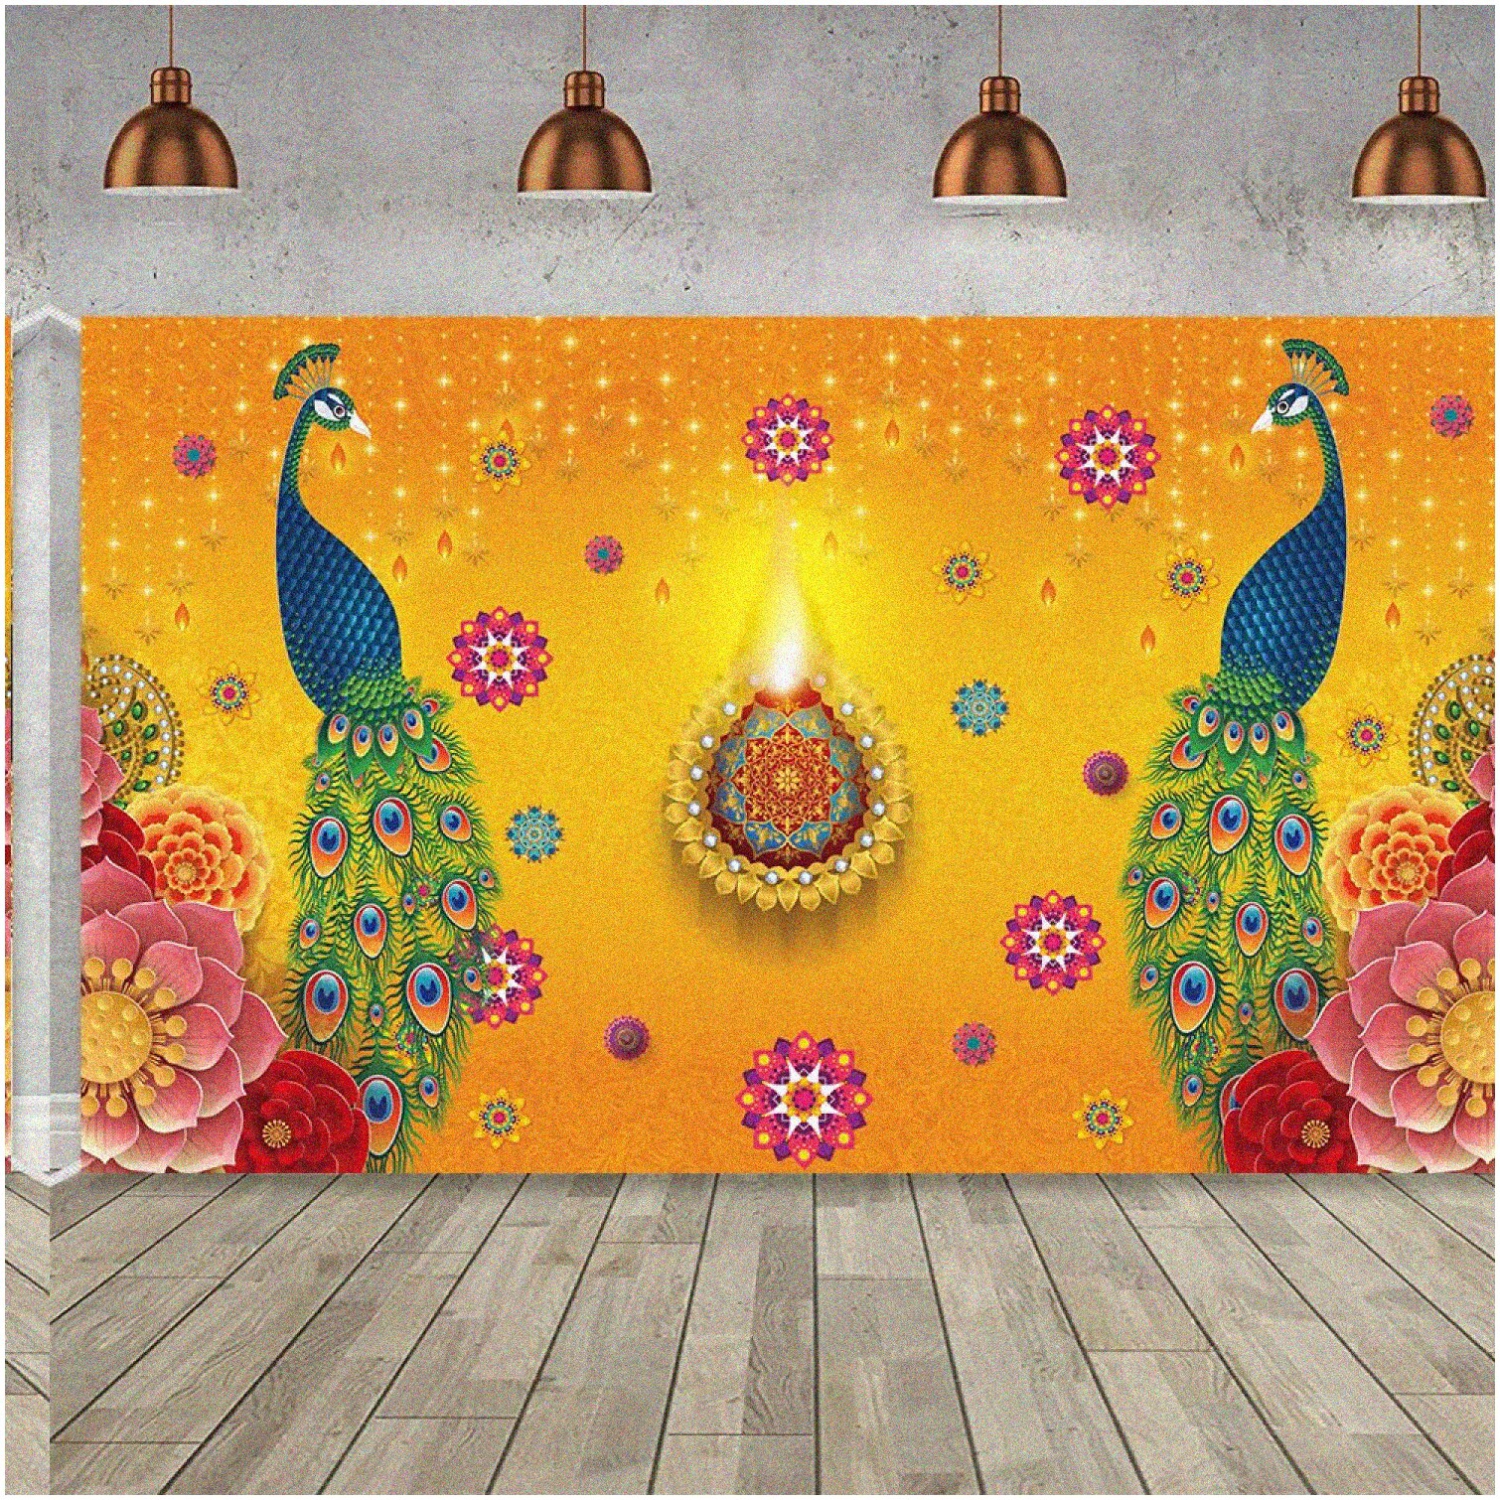 Sparkling Diwali Celebration Backdrop - Vibrant 70.8X43.3inch Banner for India's Festival of Lights. Perfect Diwali Party Supplier - Captivating Photography Background & Party Deco